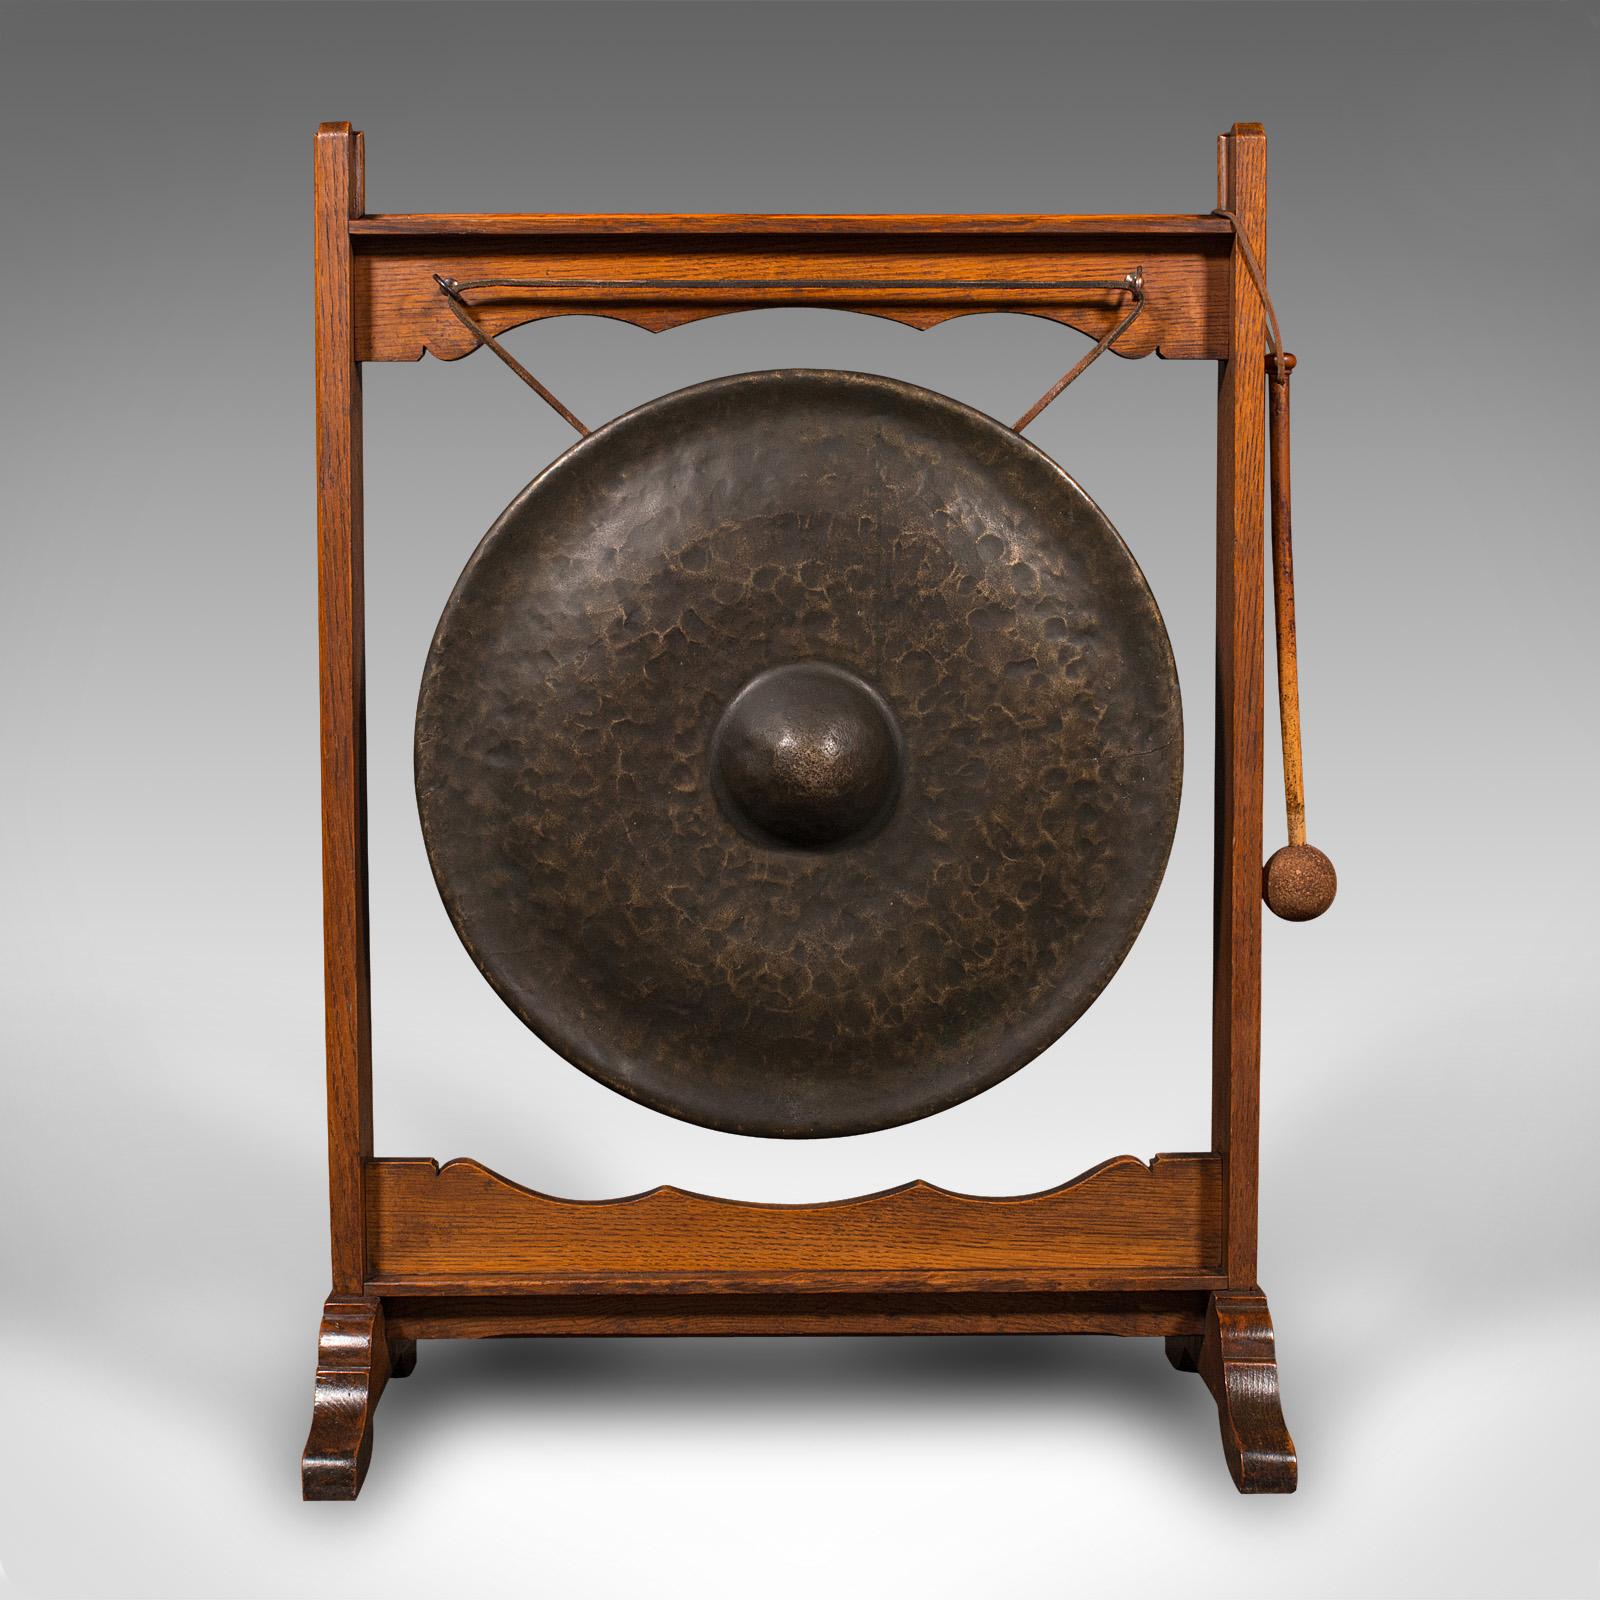 This is a large antique ceremonial dinner gong. An English, oak and bronze framed chime, dating to the late Victorian period, circa 1900.

Generously sized dinner gong within a quality frame
Displays a desirable aged patina and in good